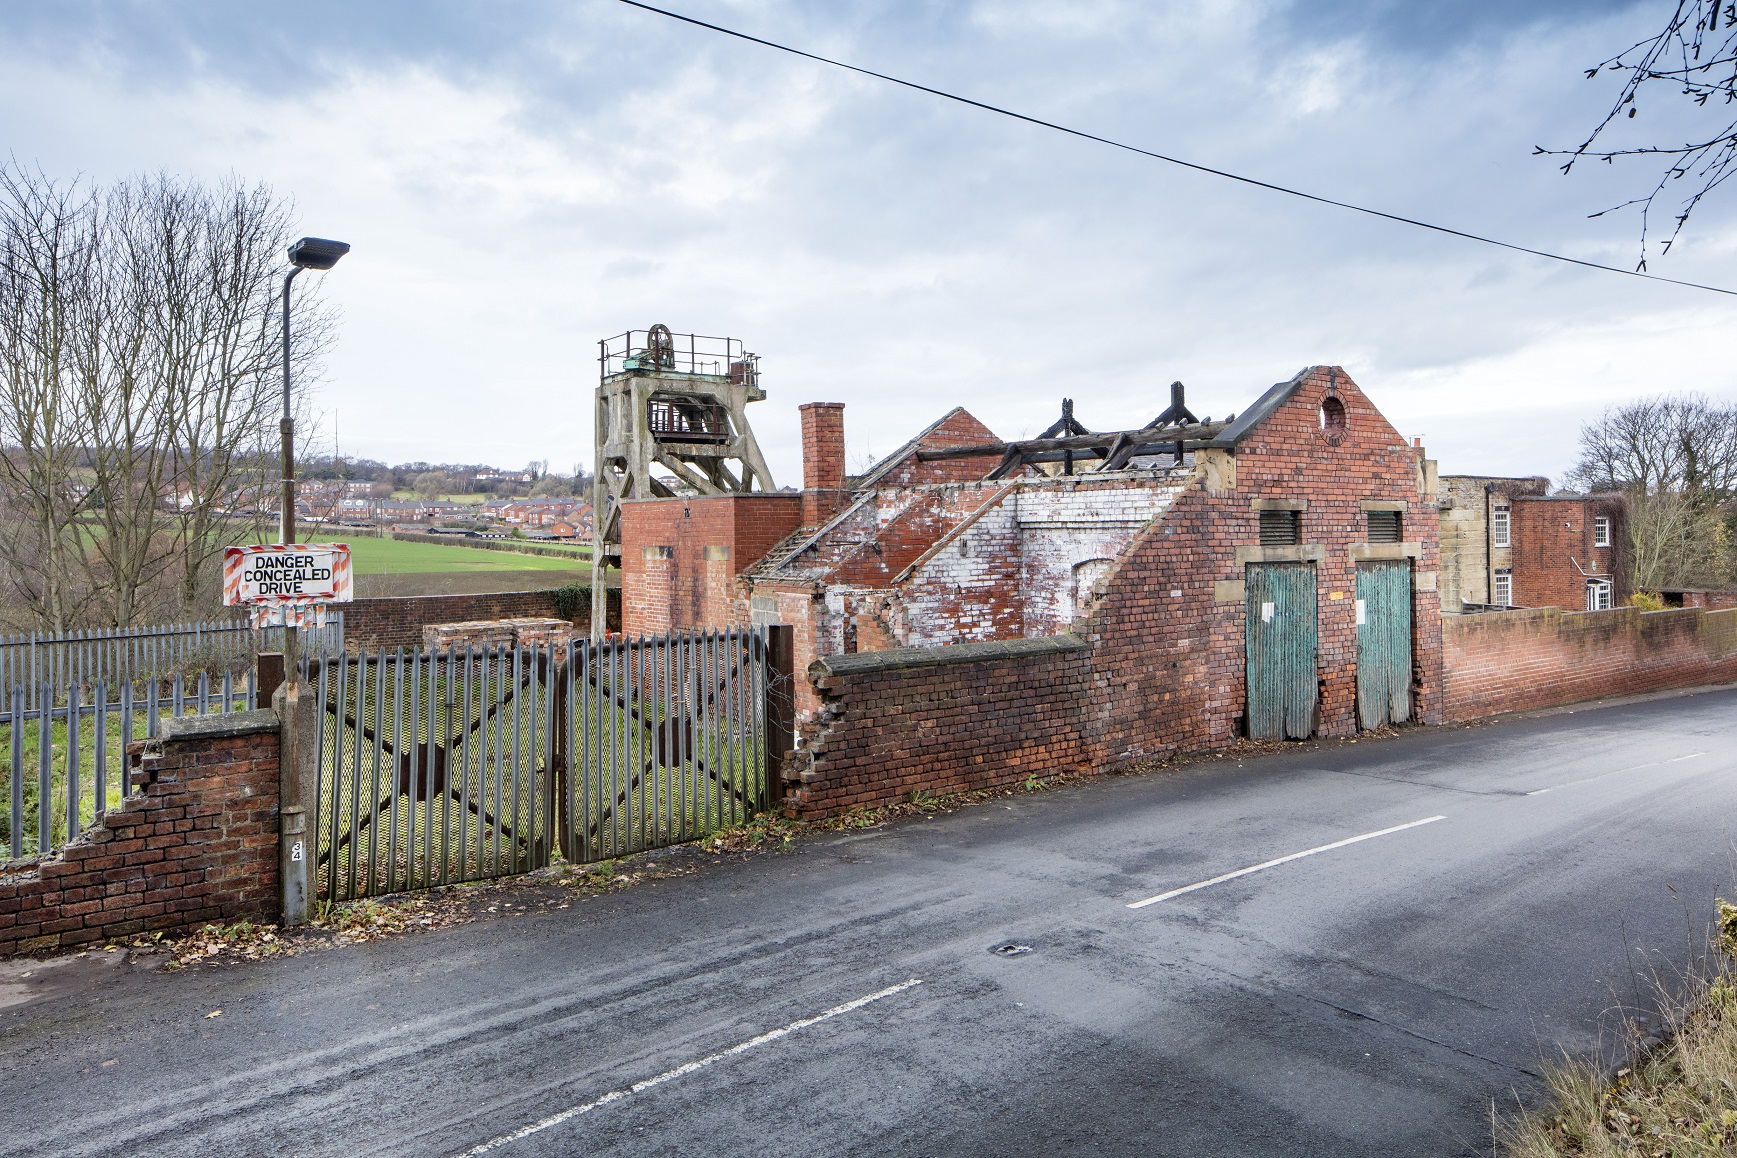 Hemingfield Colliery (Elsecar Low Pit), Elsecar, Barnsley, South Yorkshire. Colliery sunk in 1842-3 for Earl Fitzwilliam